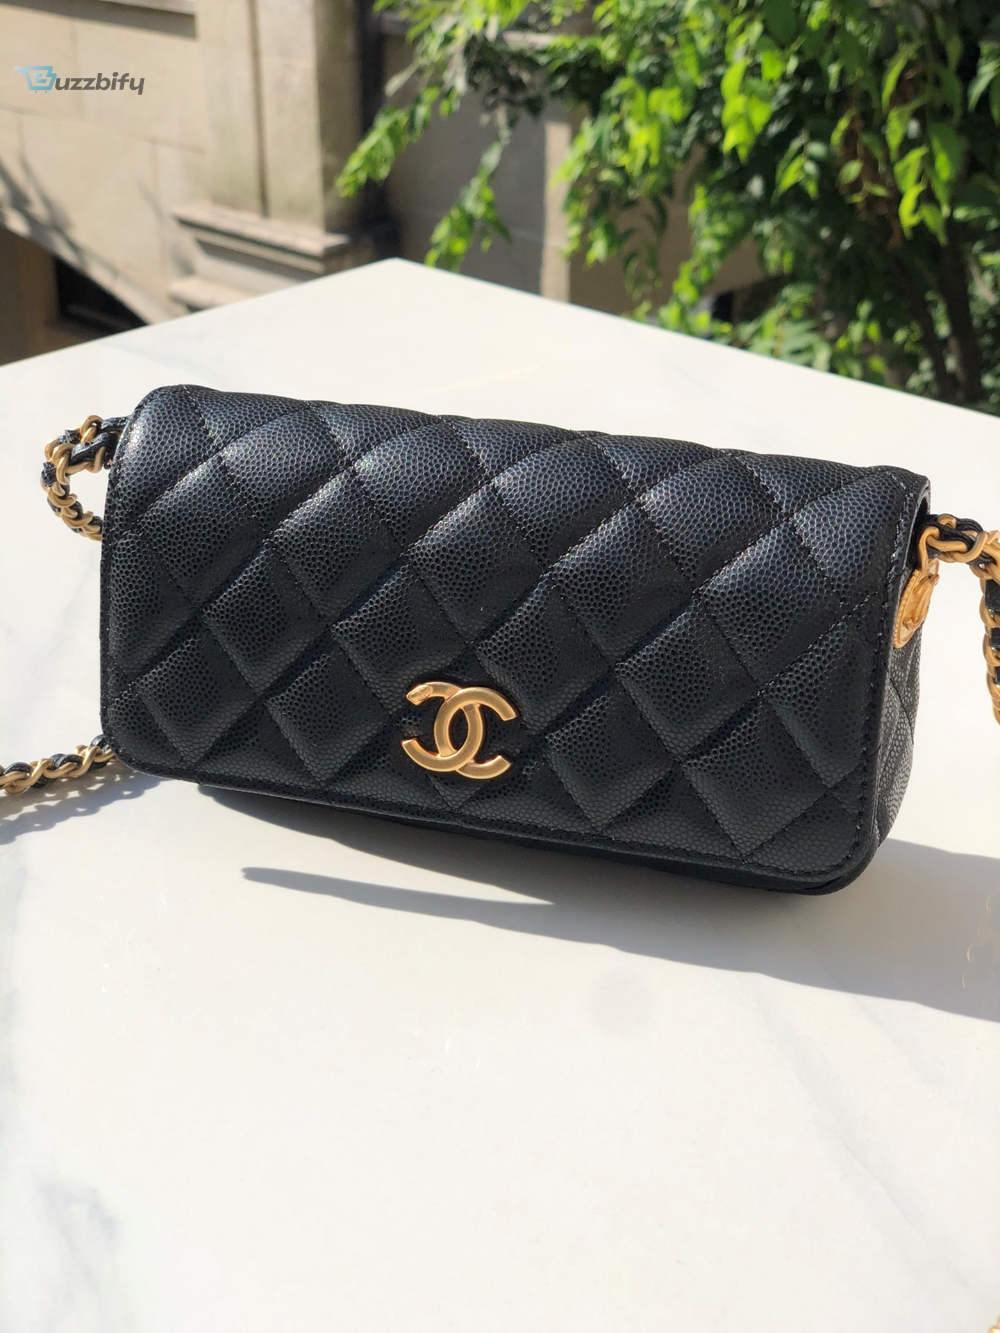 Chanel Small Flap Bags Gold Hardware Black For Women Womens Handbags Shoulder Bags 7.5In19.2Cm